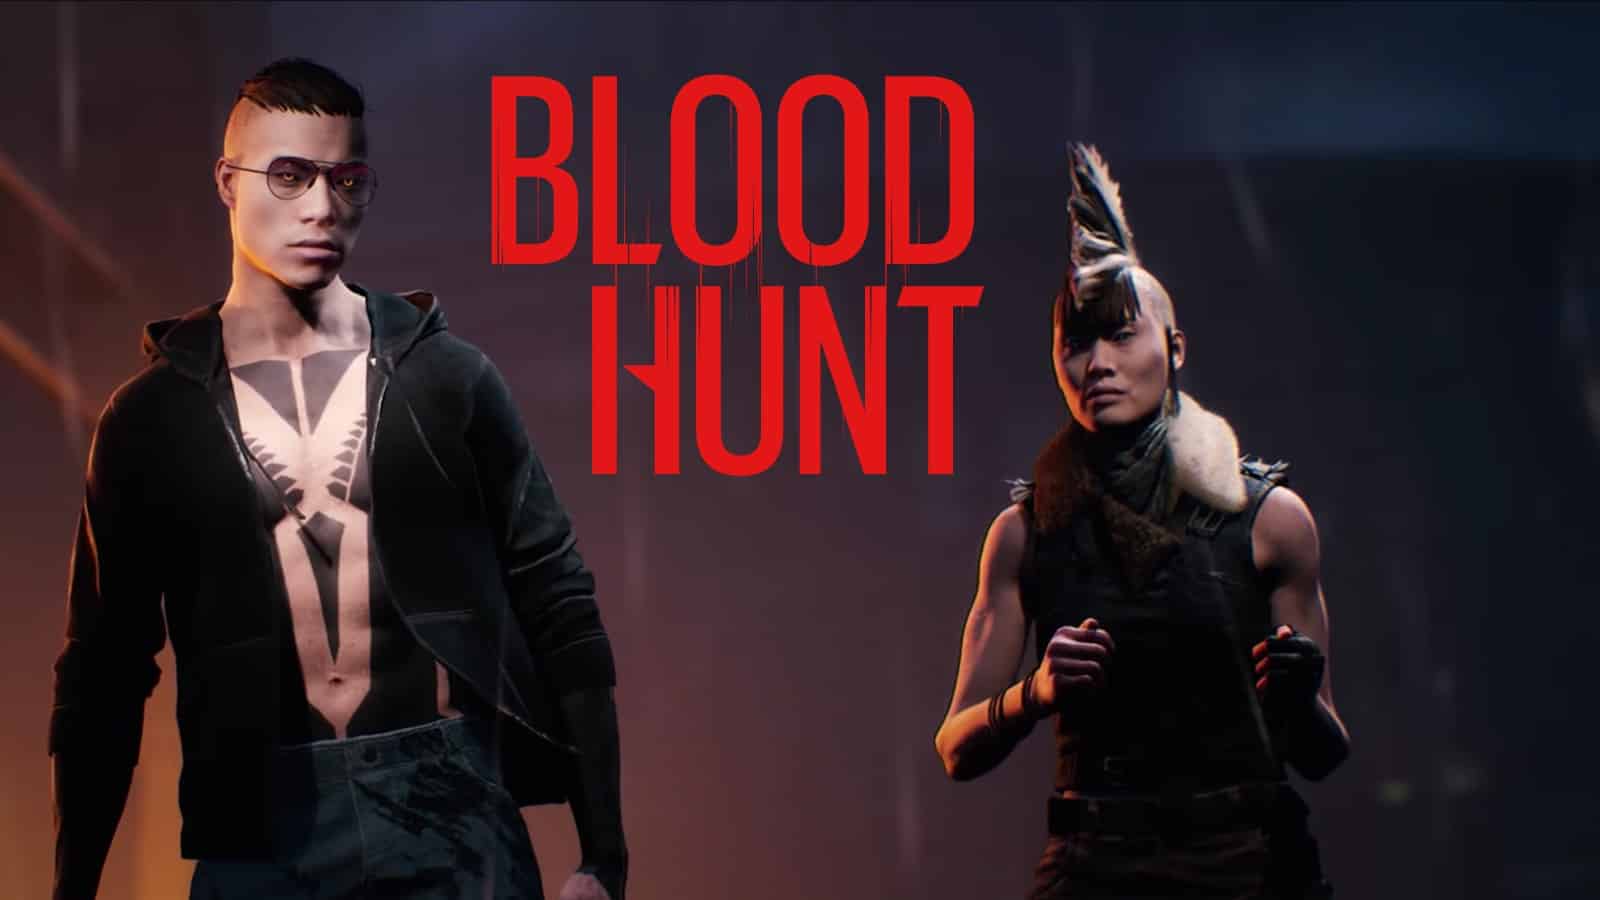 Bloodhunt characters standing beside one another